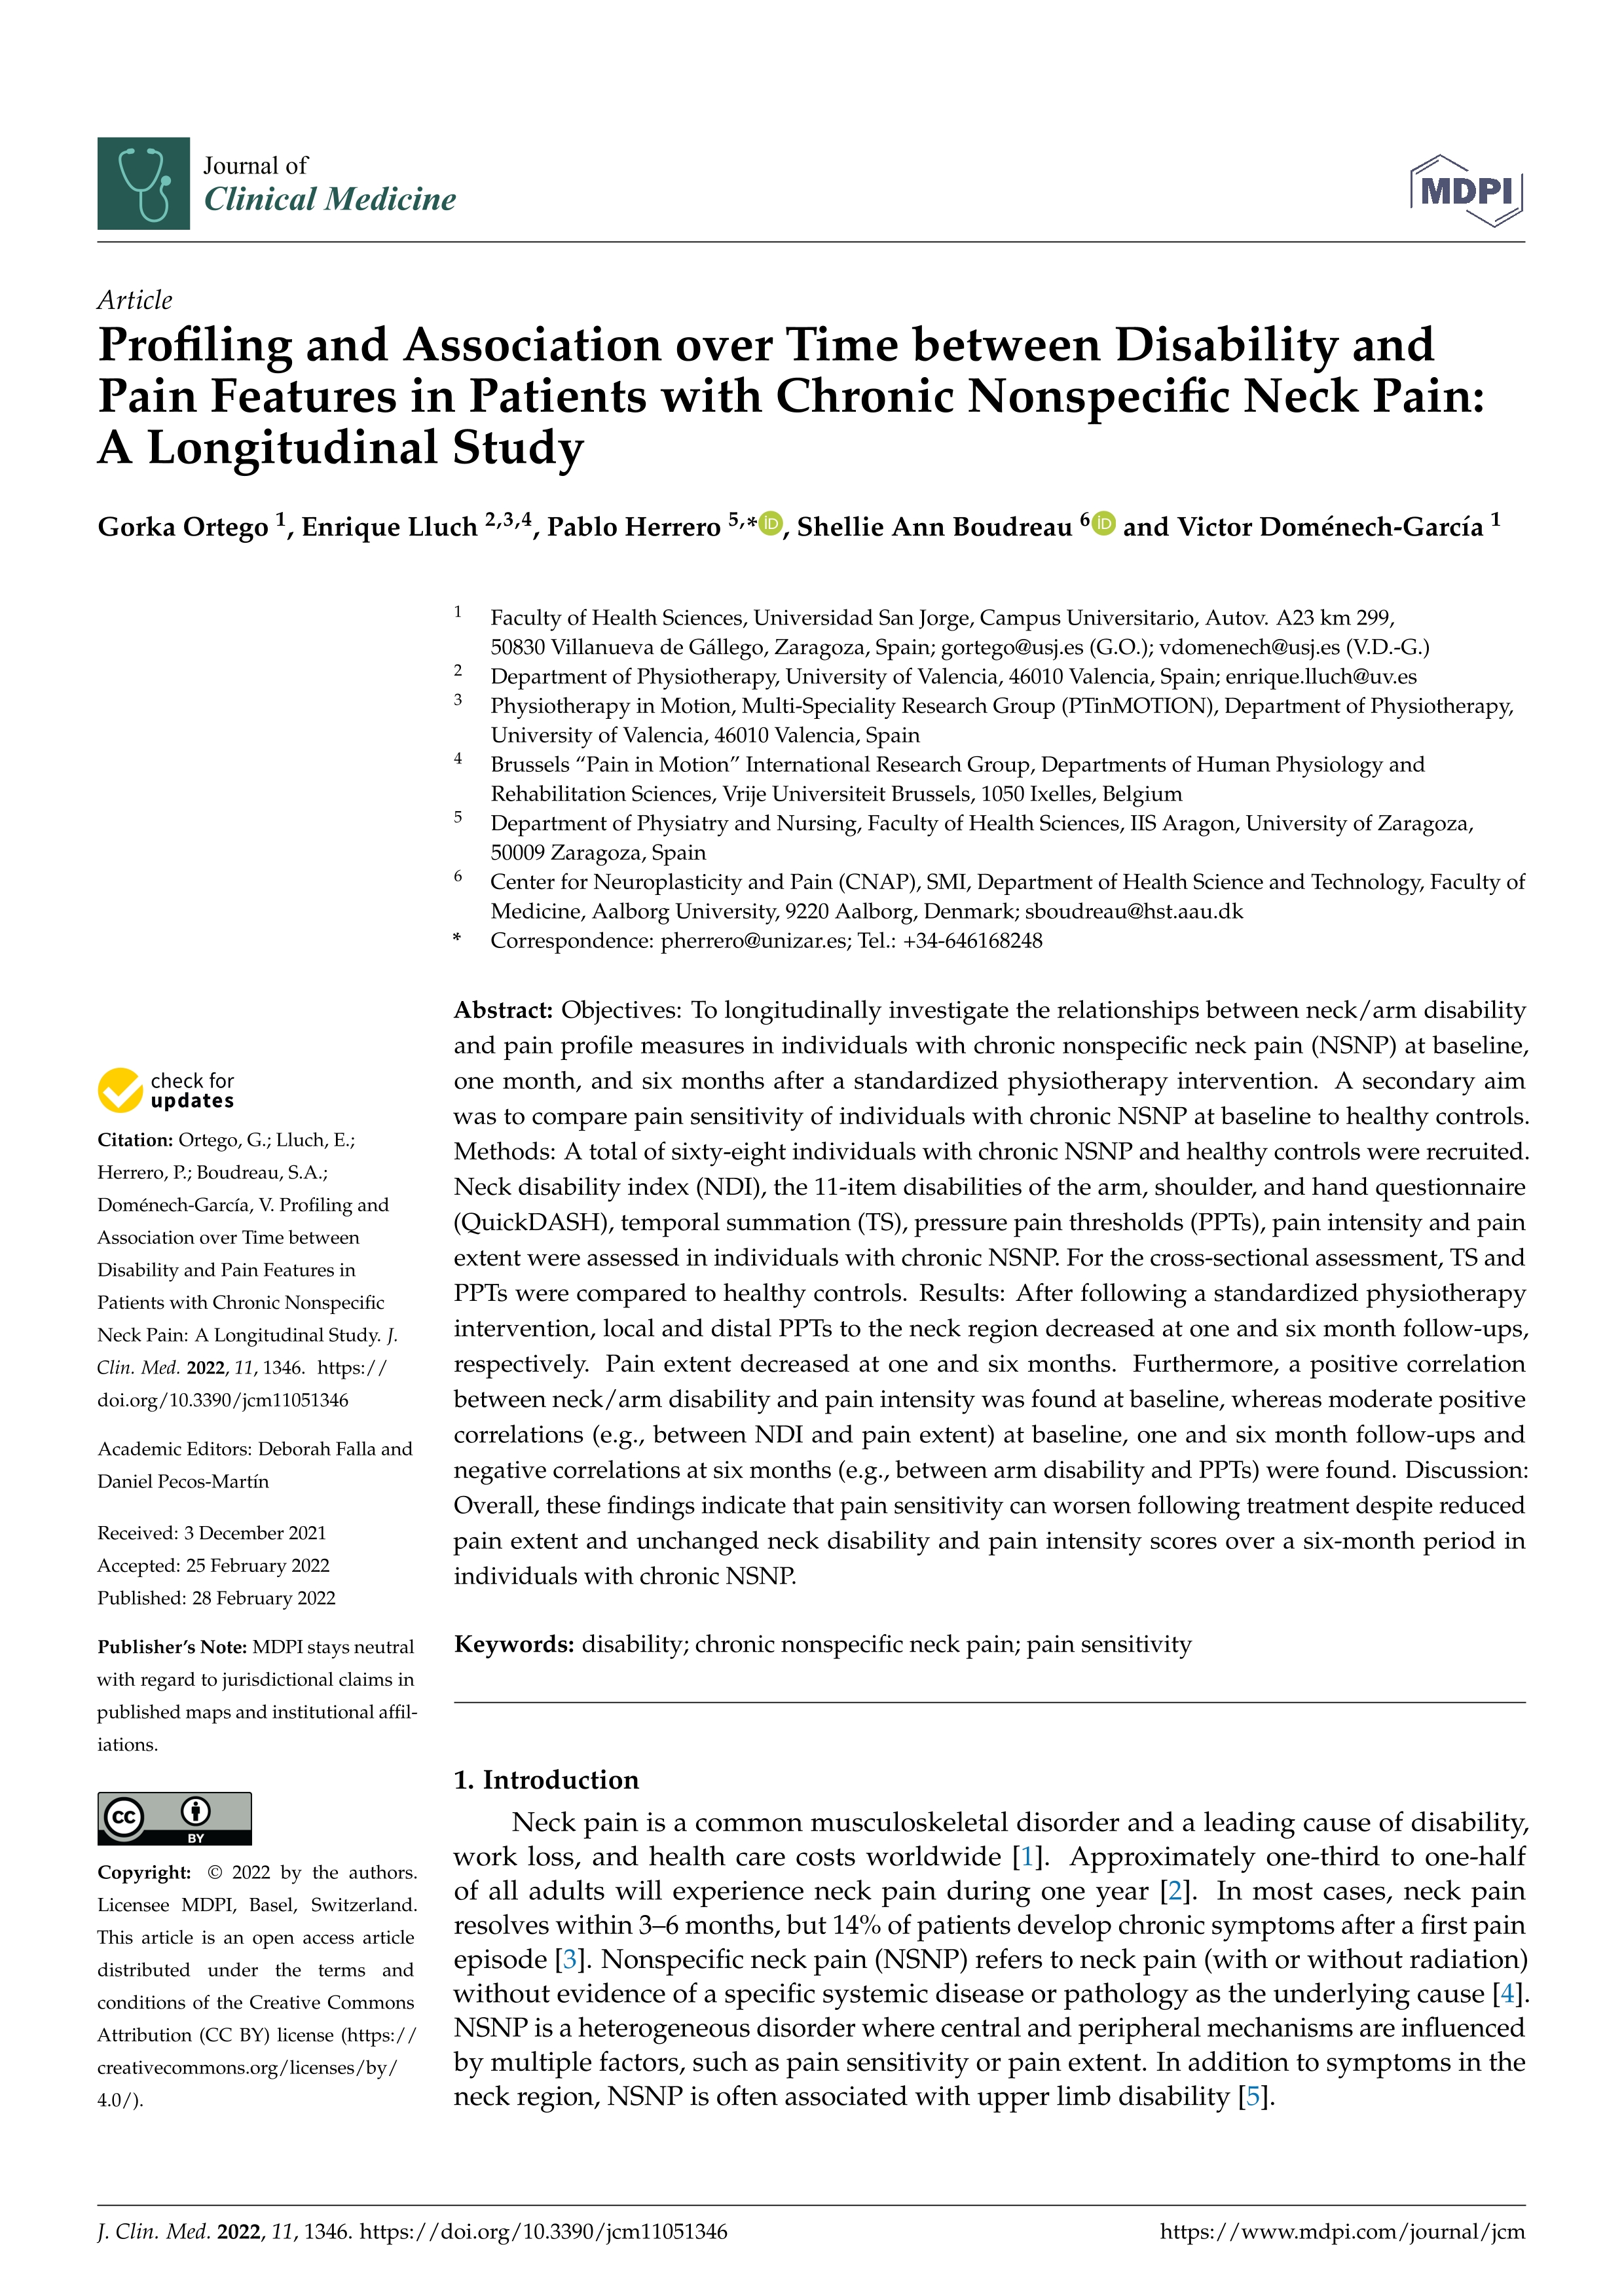 Profiling and association over time between disability and pain features in patients with chronic nonspecific neck pain: a longitudinal study